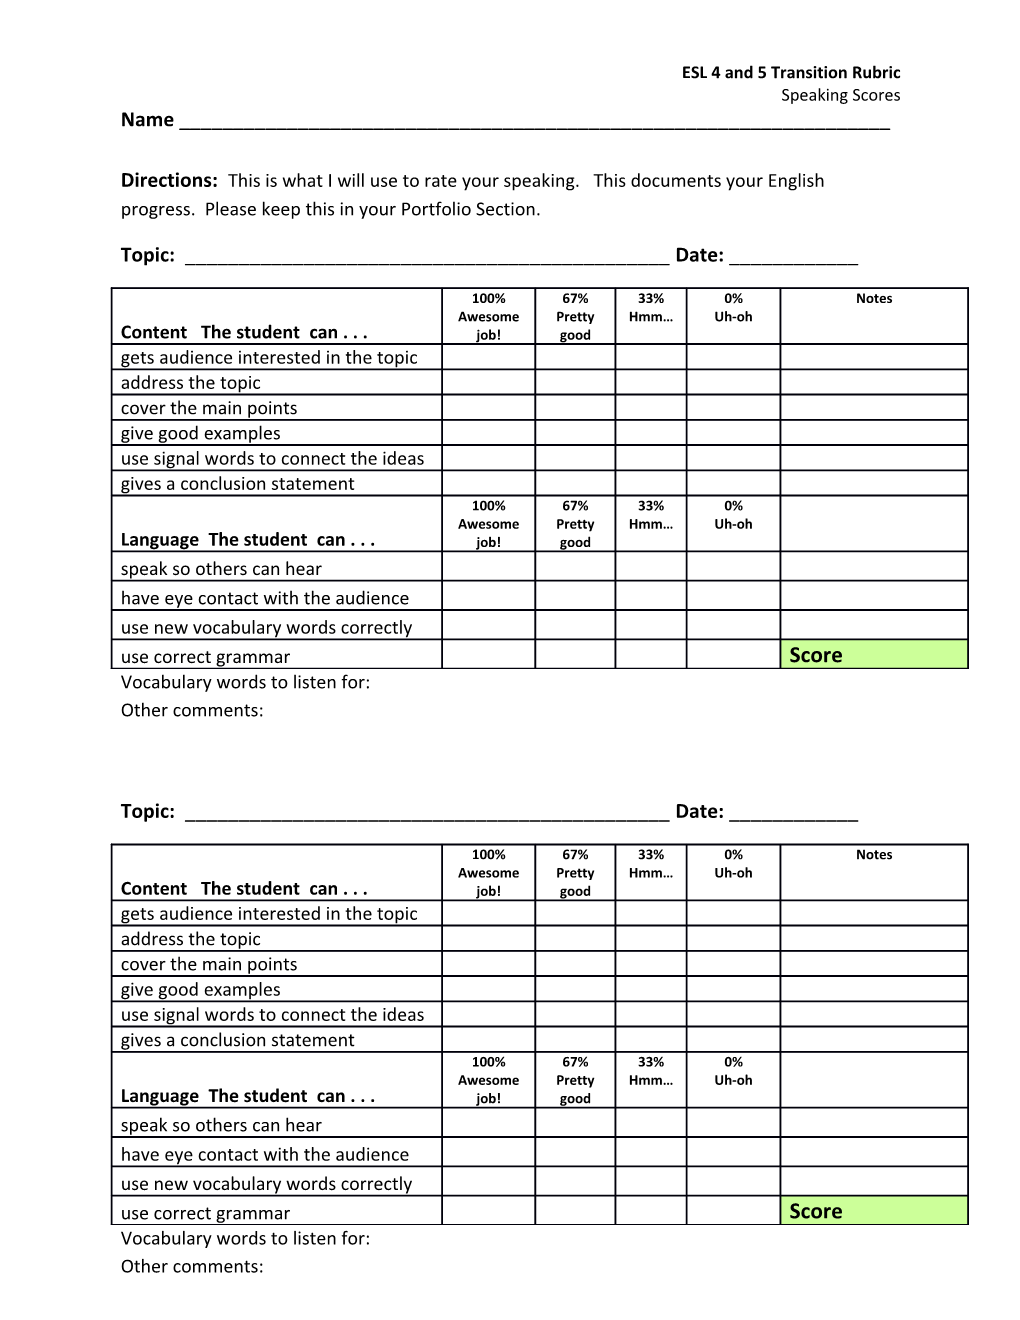 ESL 4 and 5 Transition Rubric Speaking Scores